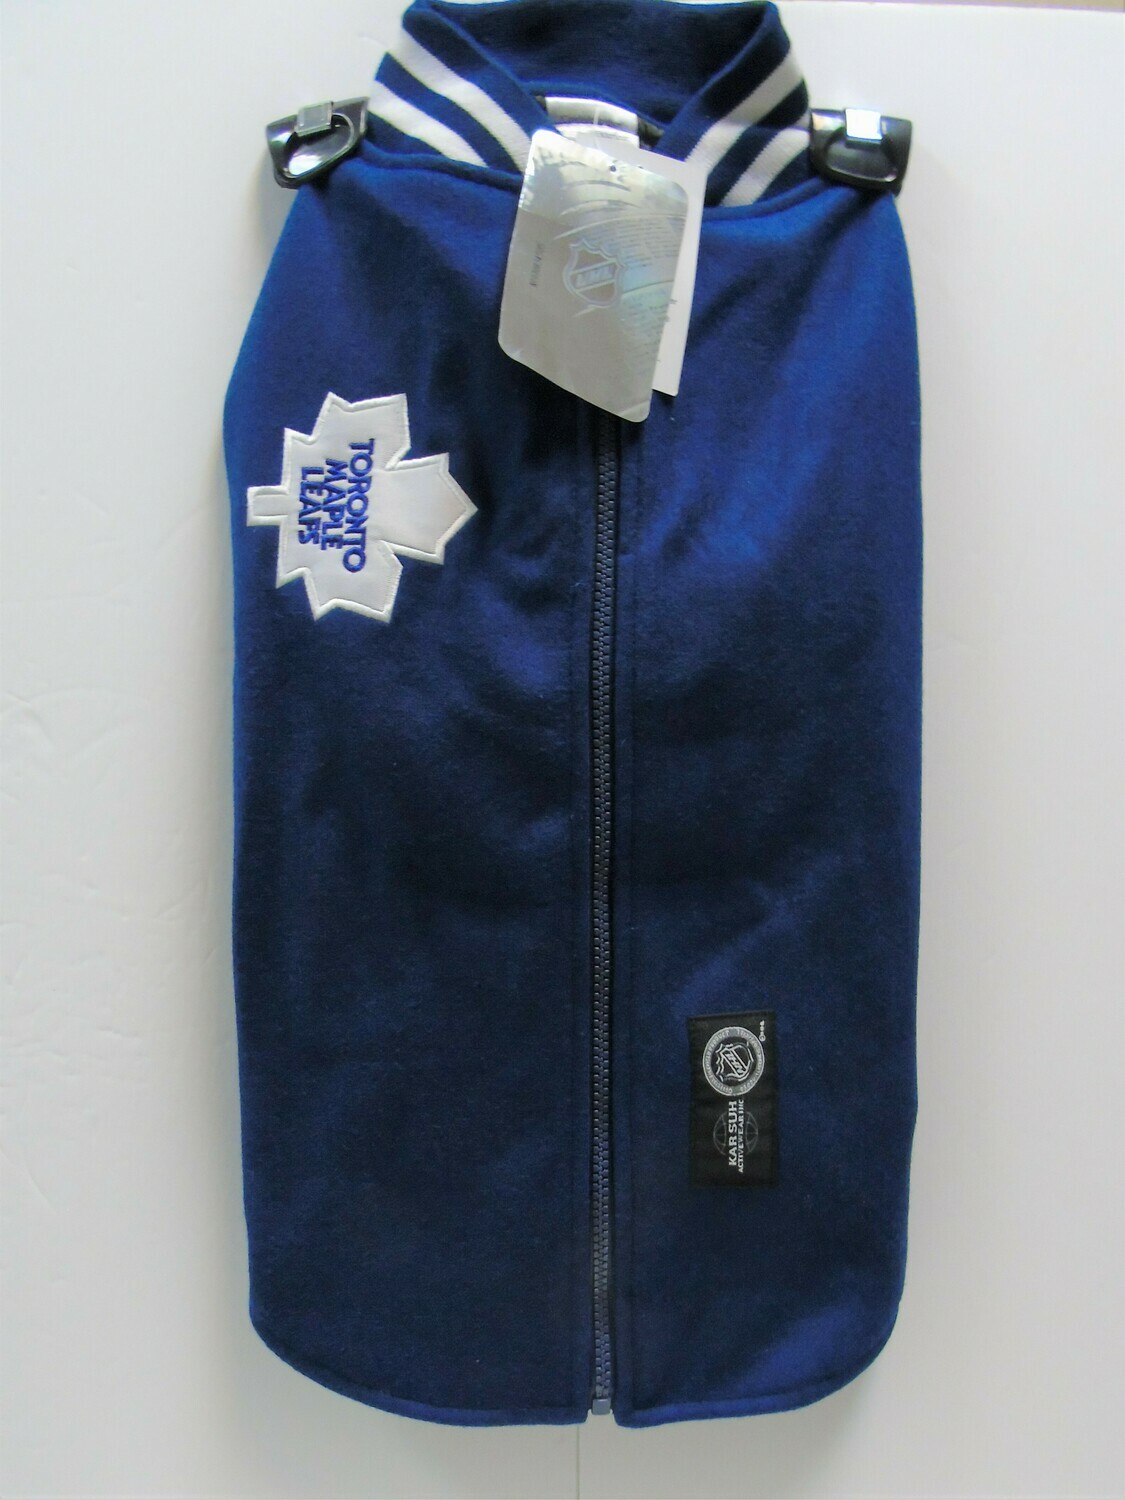 KARSUH - Maple Leaf Jacket W/Faux Leather Sleeves - Size L